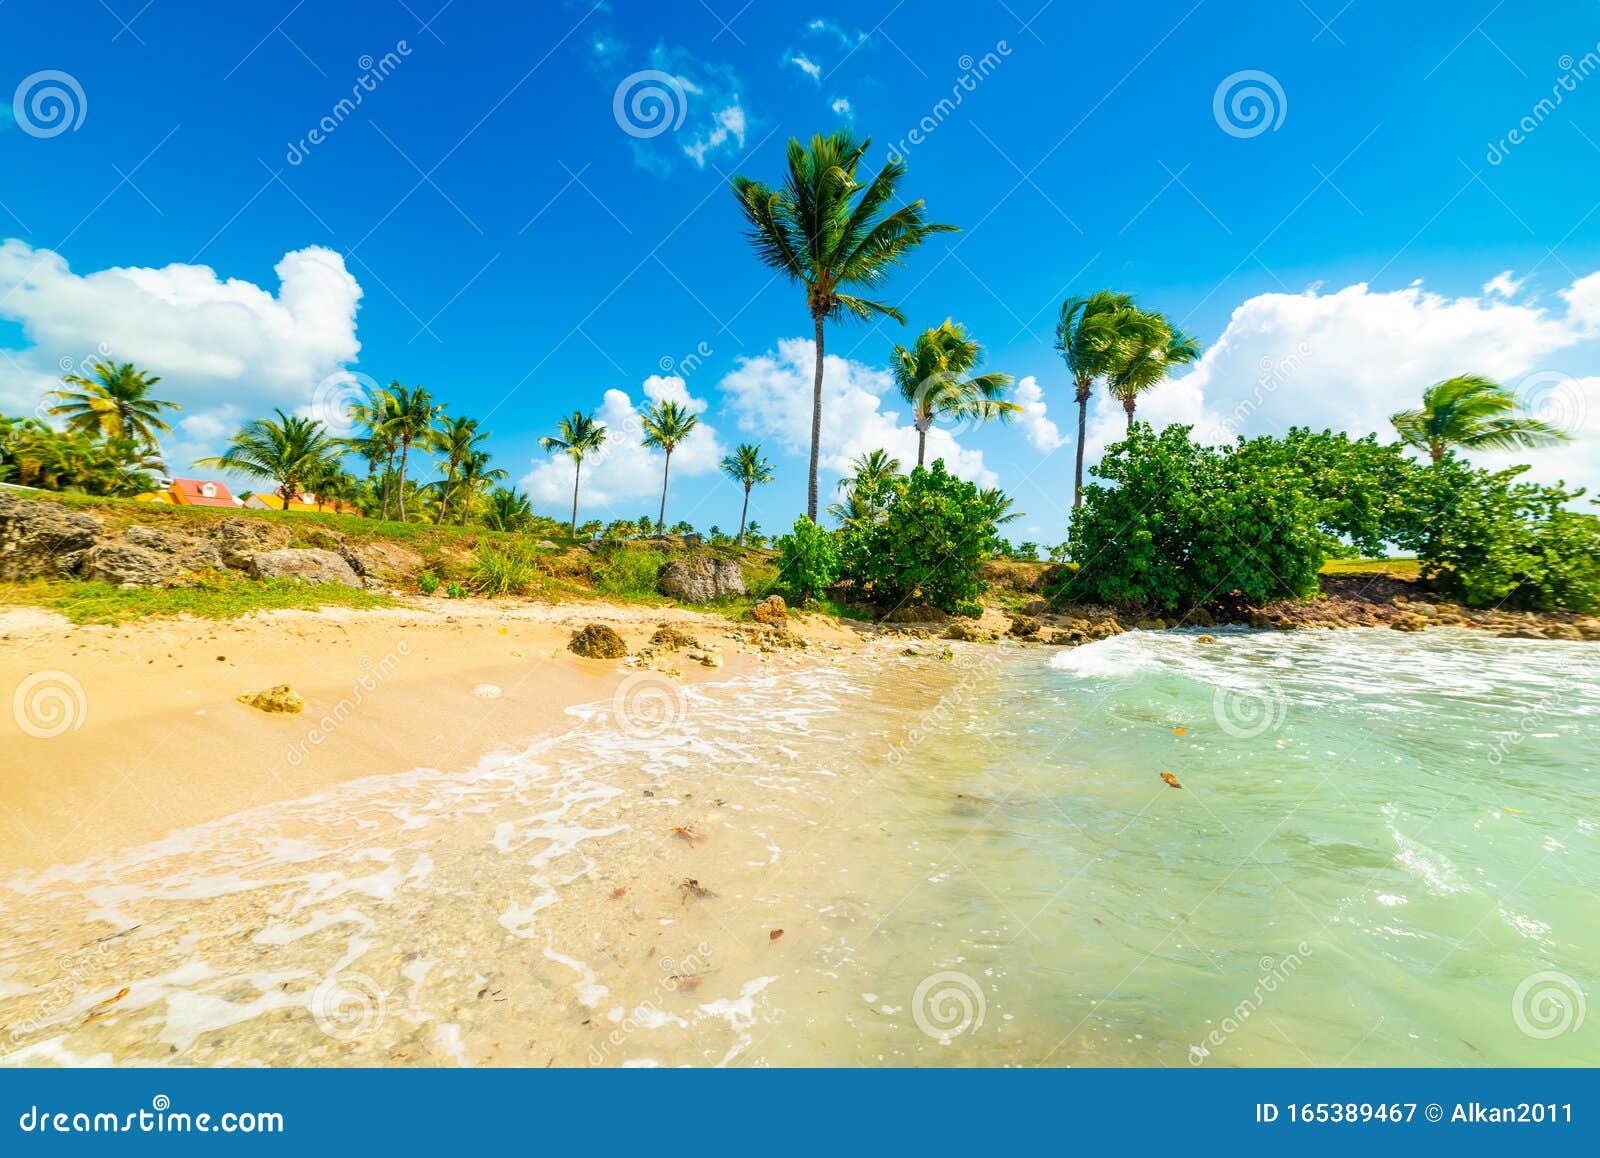 Colorful Coast in Gosier Shore in Guadeloupe Stock Image - Image of ...